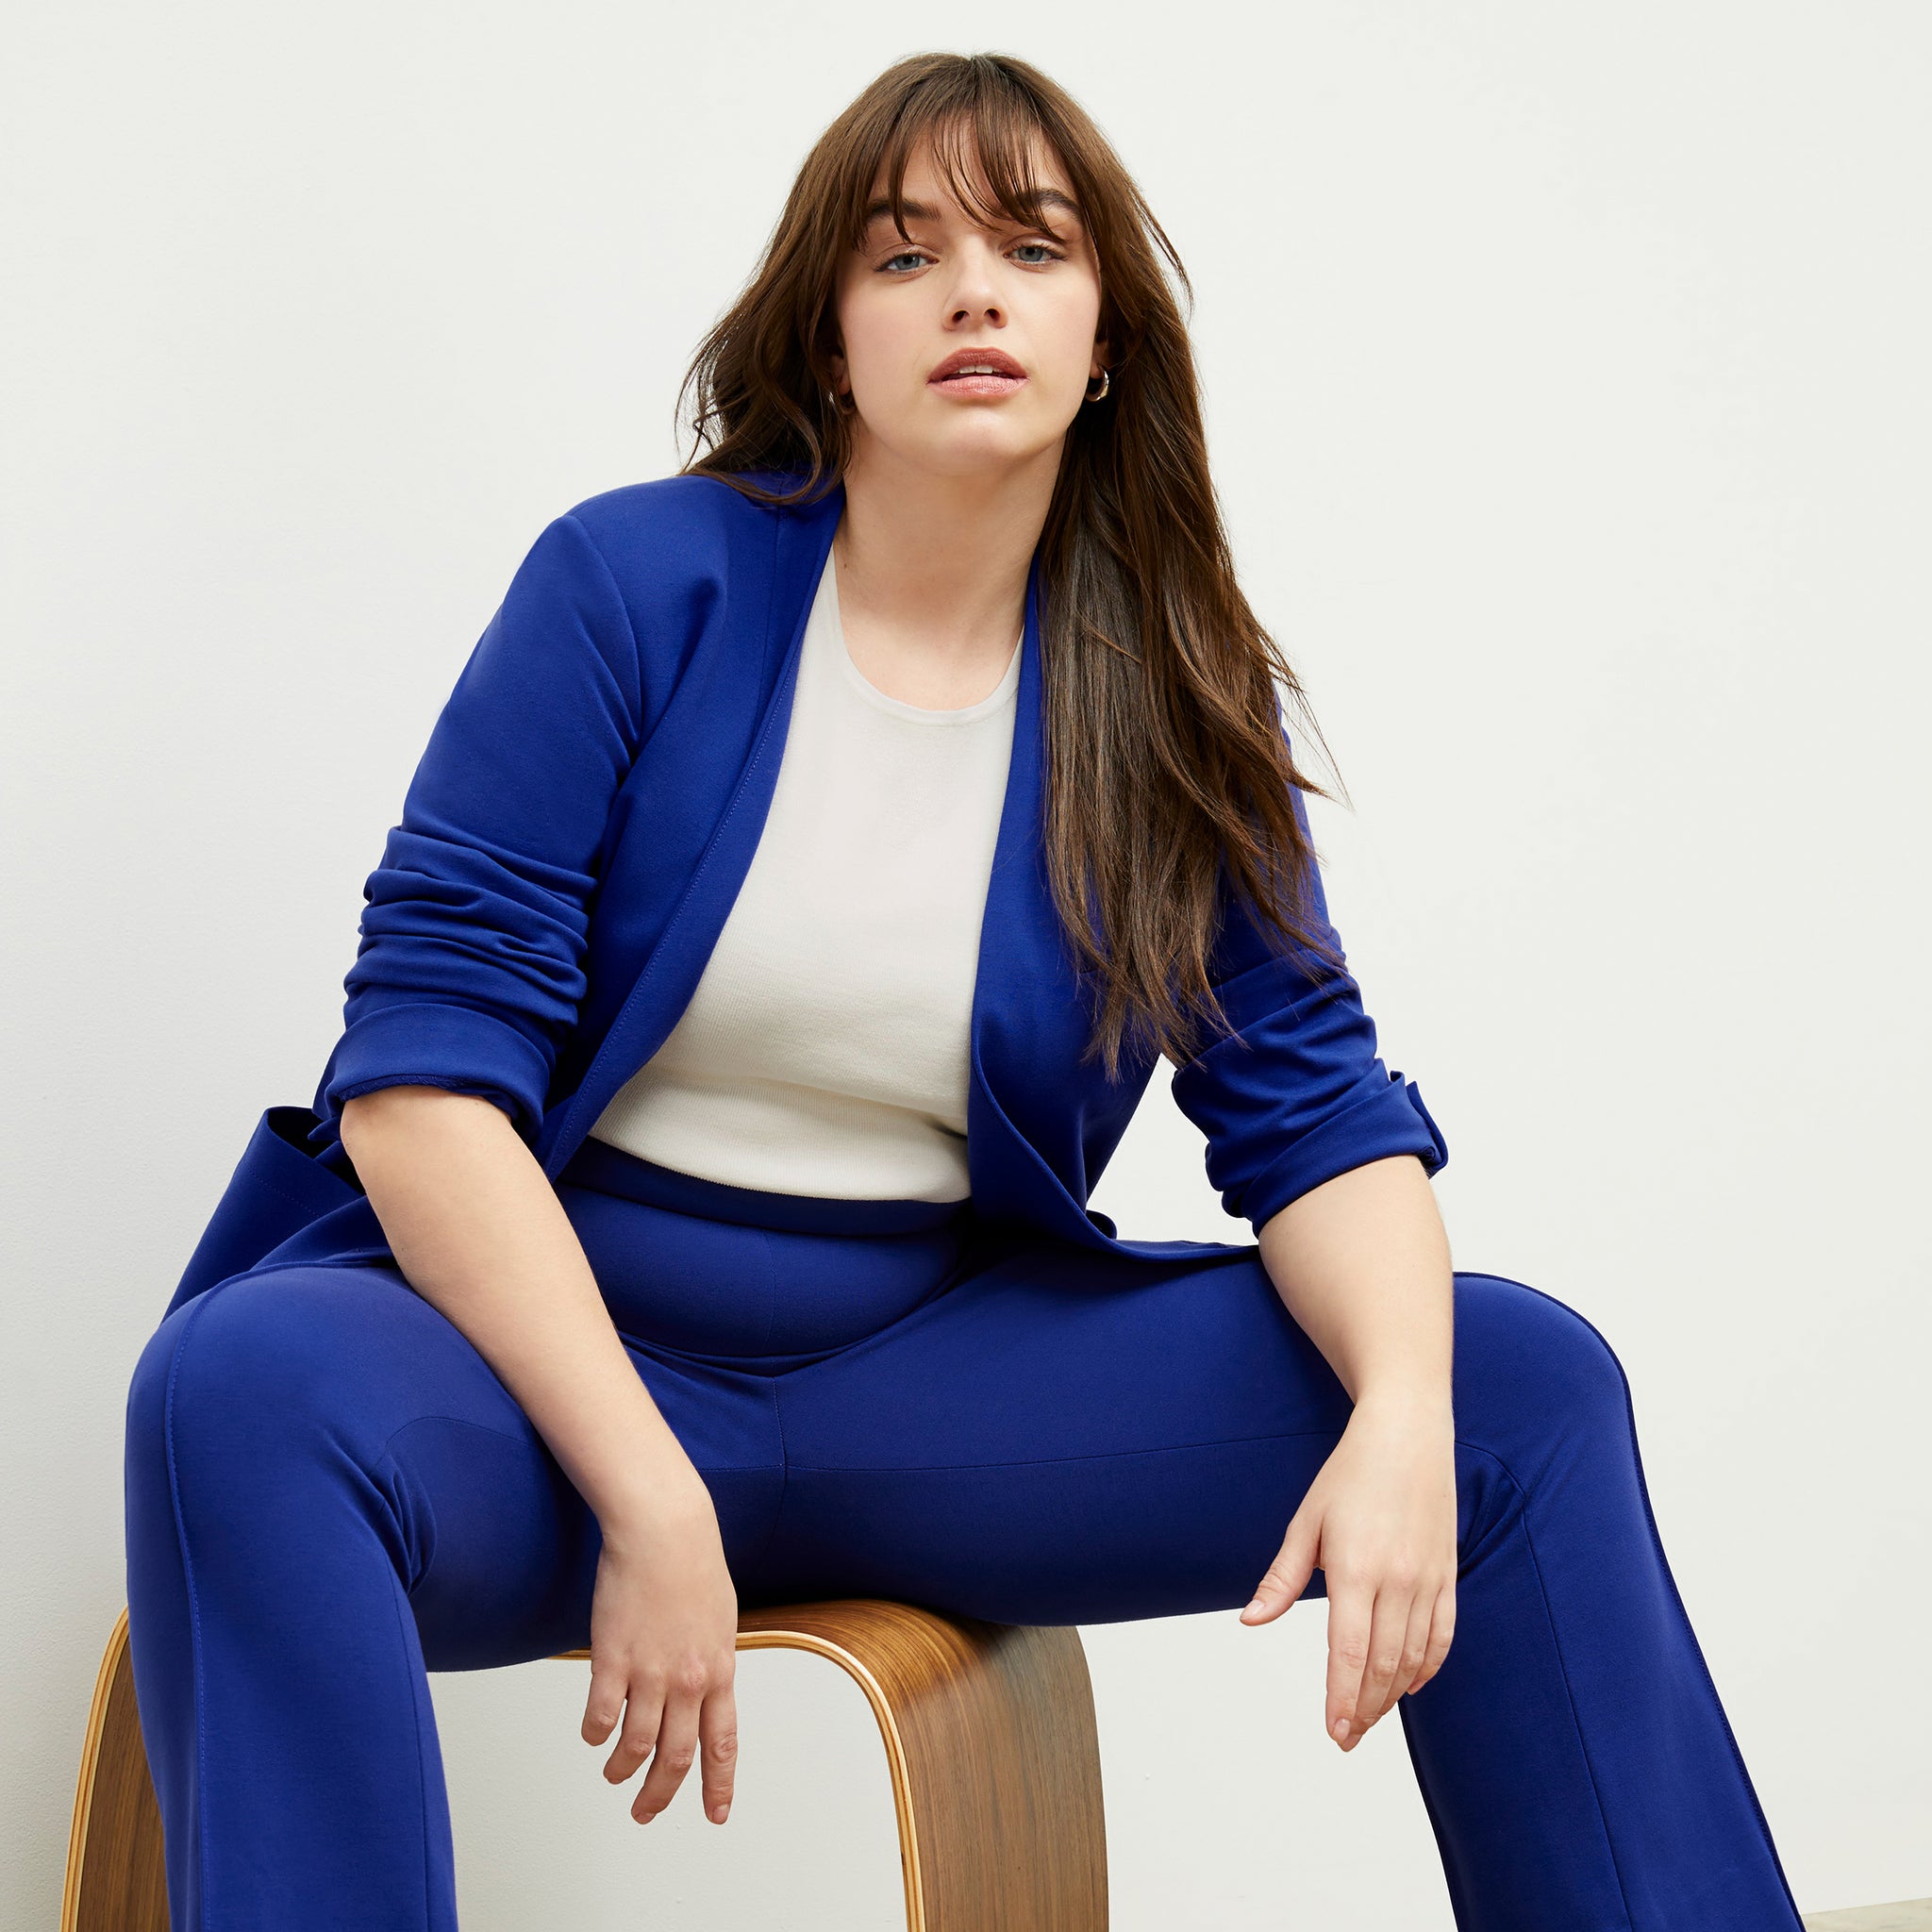 front image of a woman wearing the janette jacket in electric blue